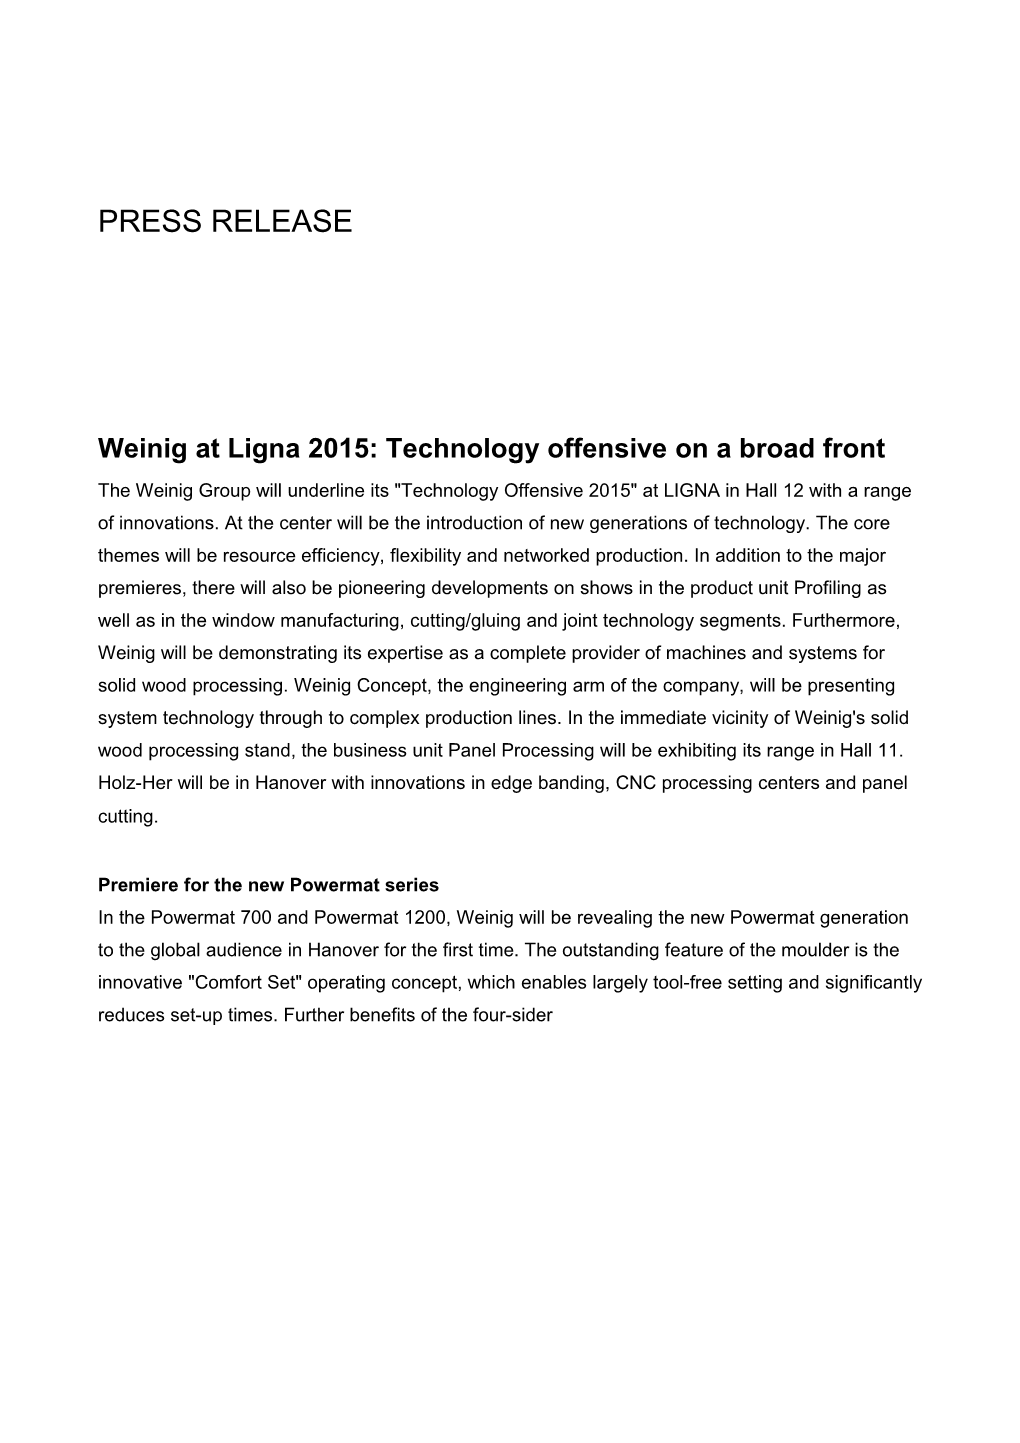 Weinig at Ligna 2015: Technology Offensive on a Broad Front